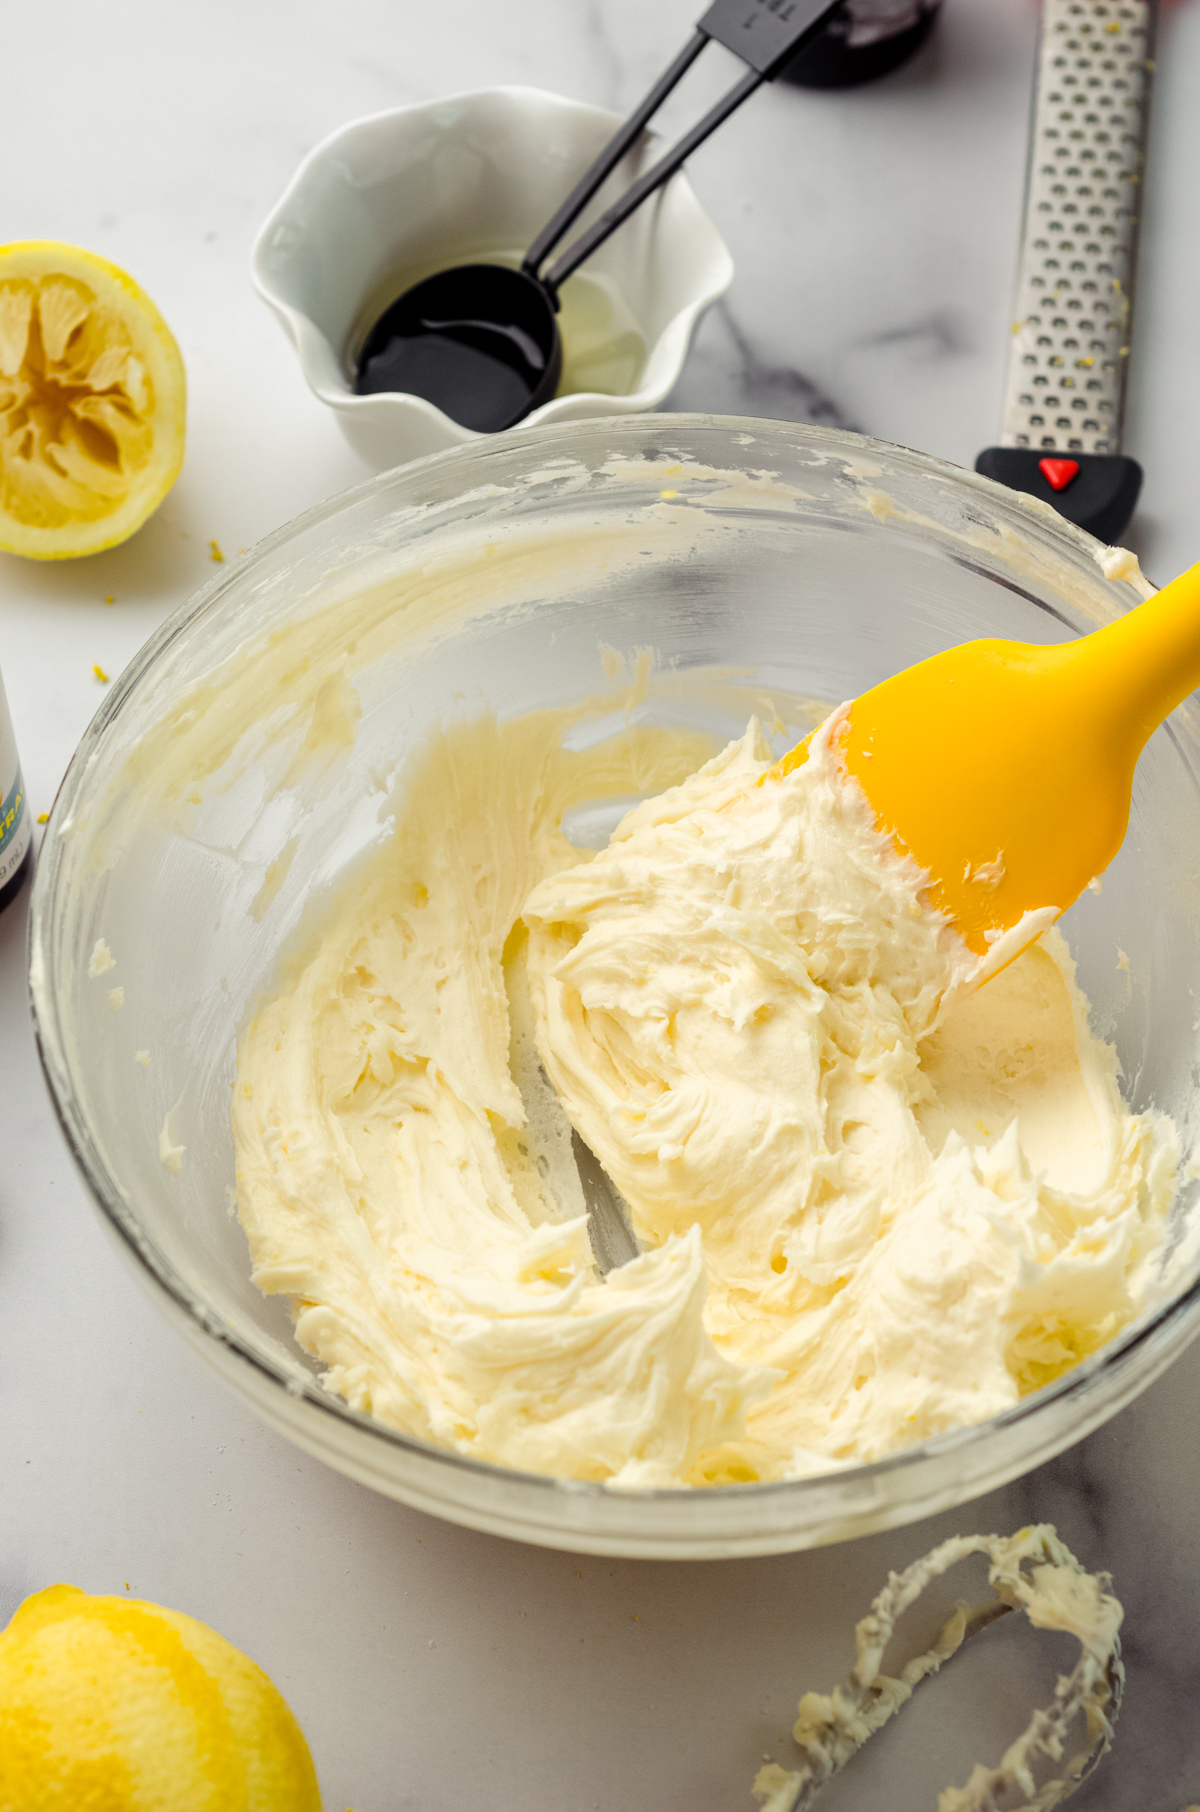 Lemon frosting in a bowl with a yellow spatula.